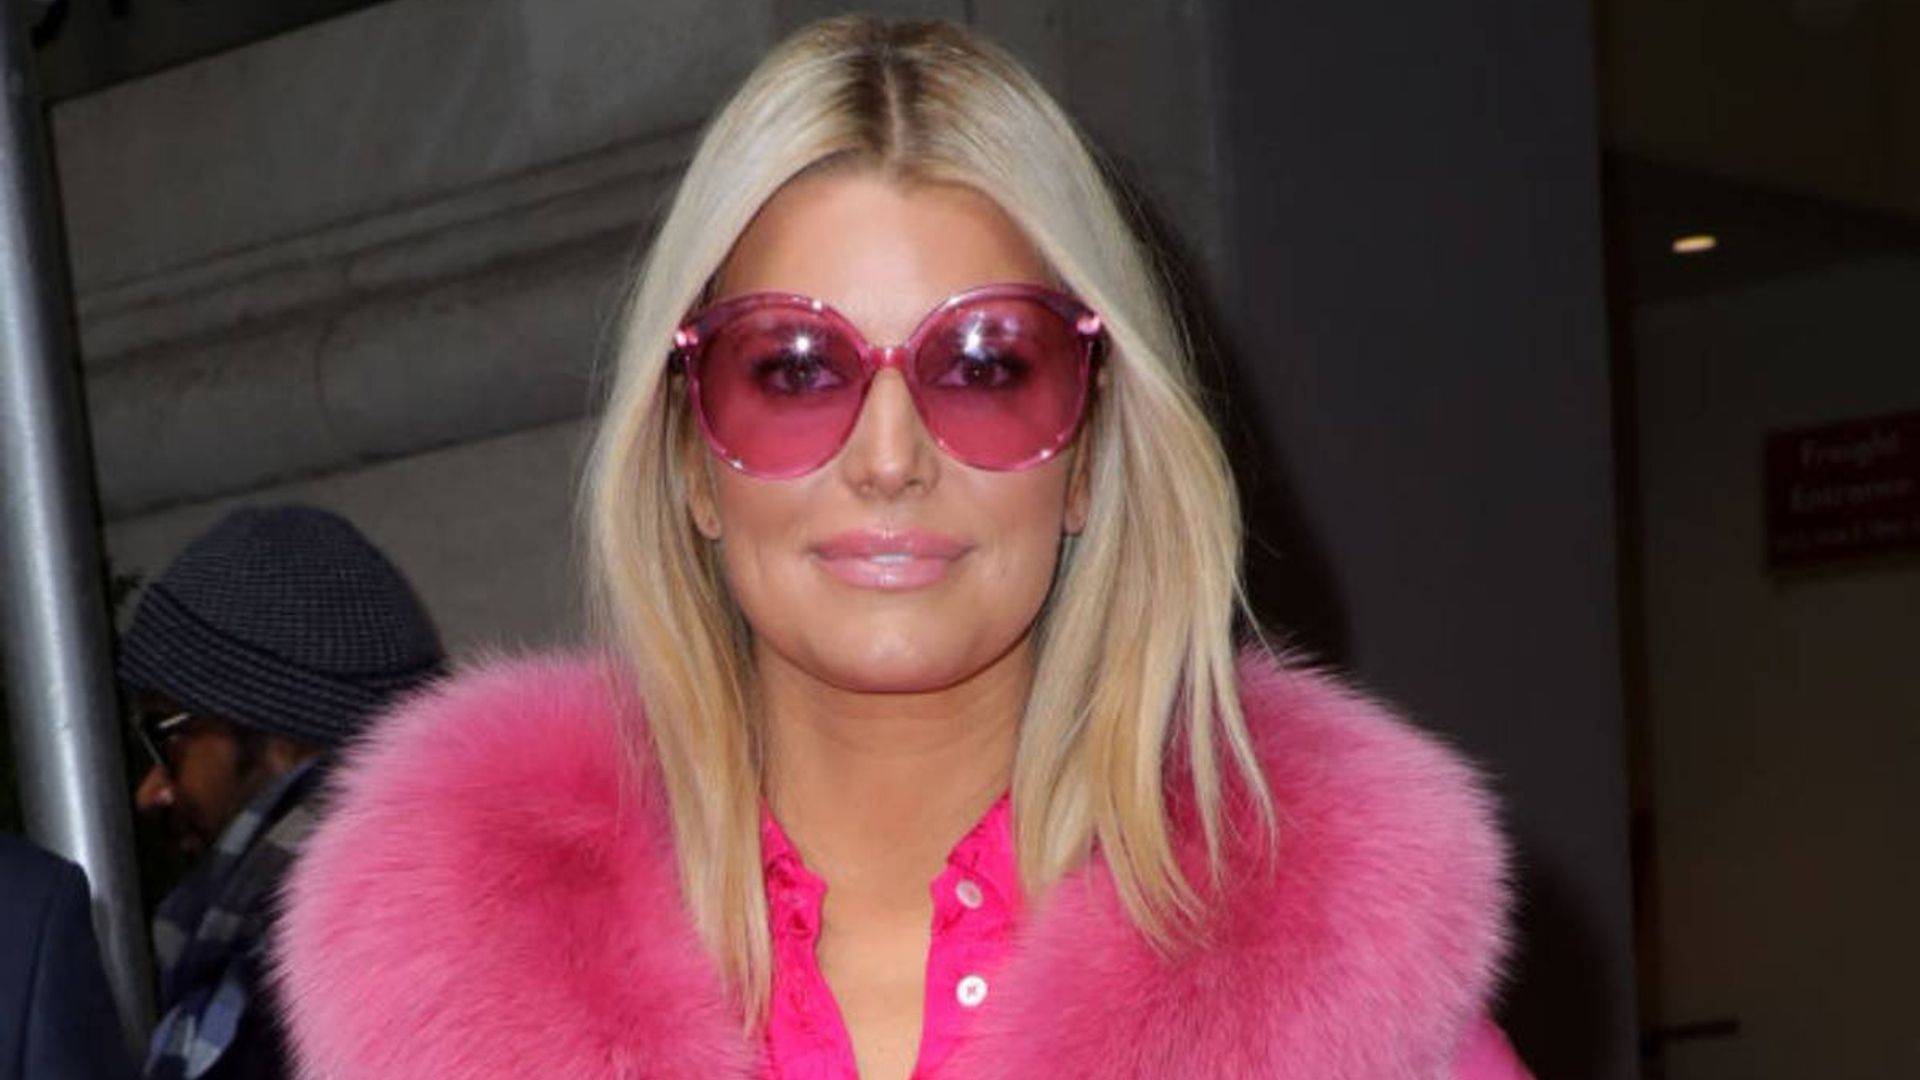 Jessica Simpson steps out looking thinner than ever in tight